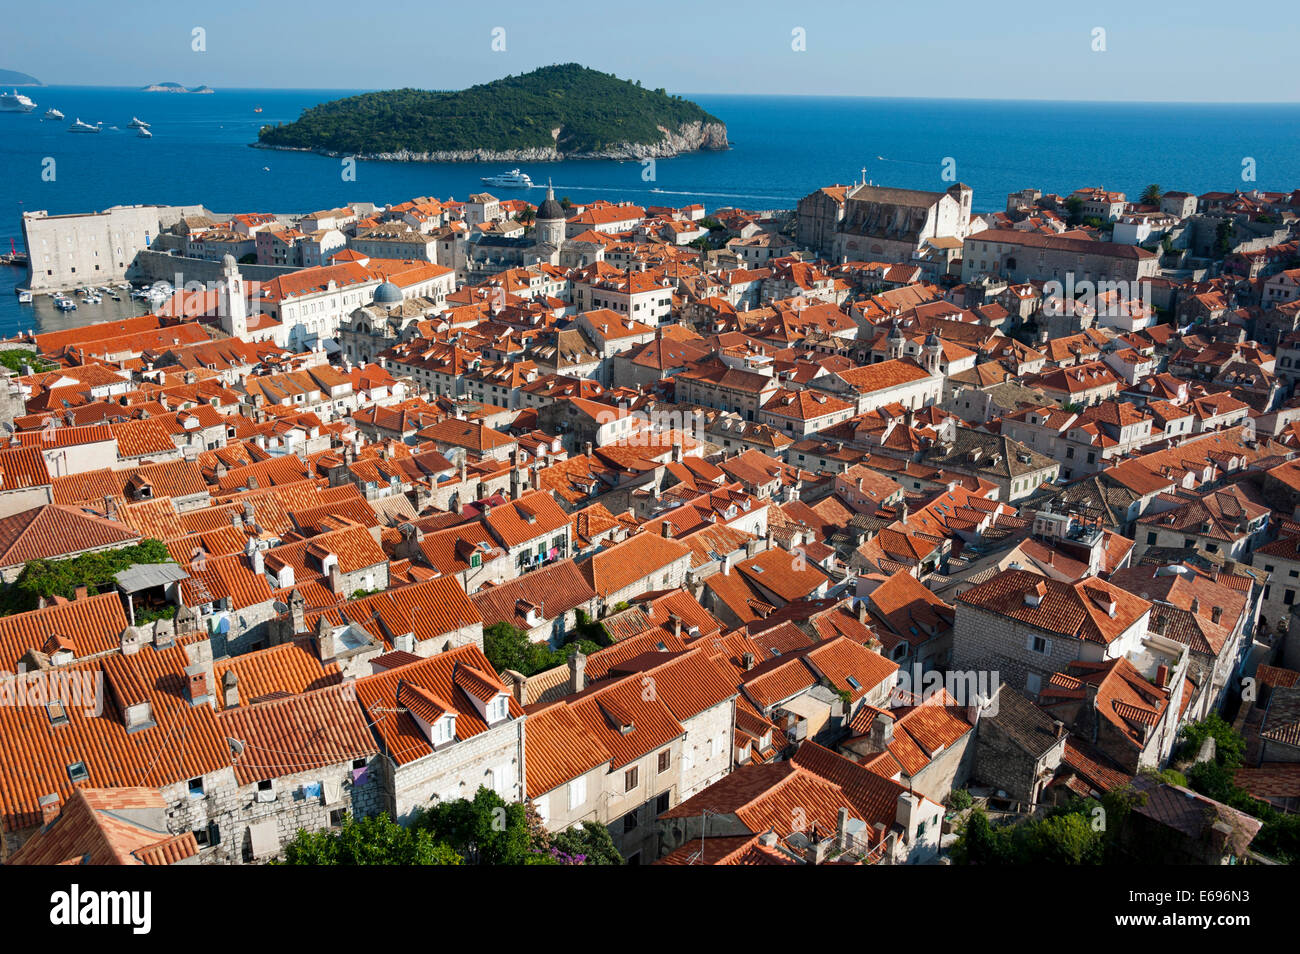 View from the city wall over the historic town centre towards the island of Lokrum, Dubrovnik, Dalmatia, Croatia Stock Photo